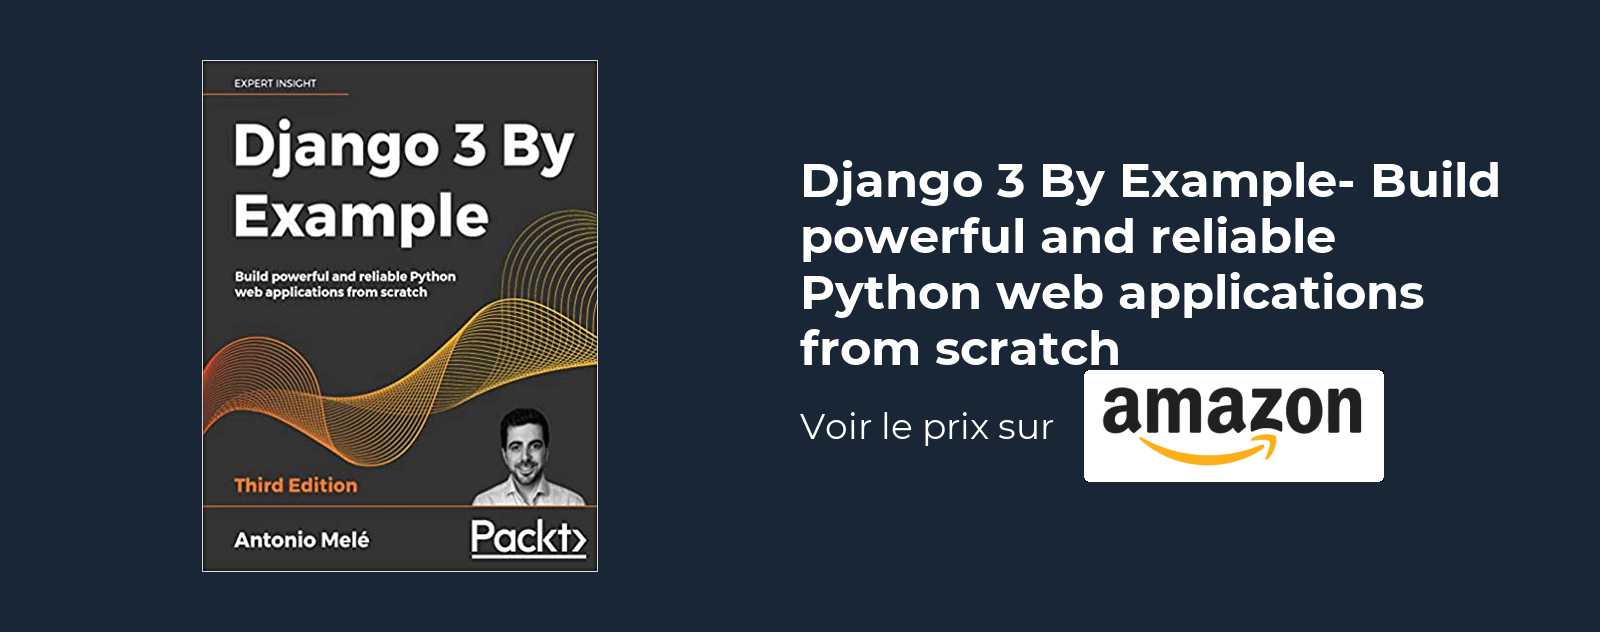 Django 3 By Example- Build powerful and reliable Python web applications from scratch